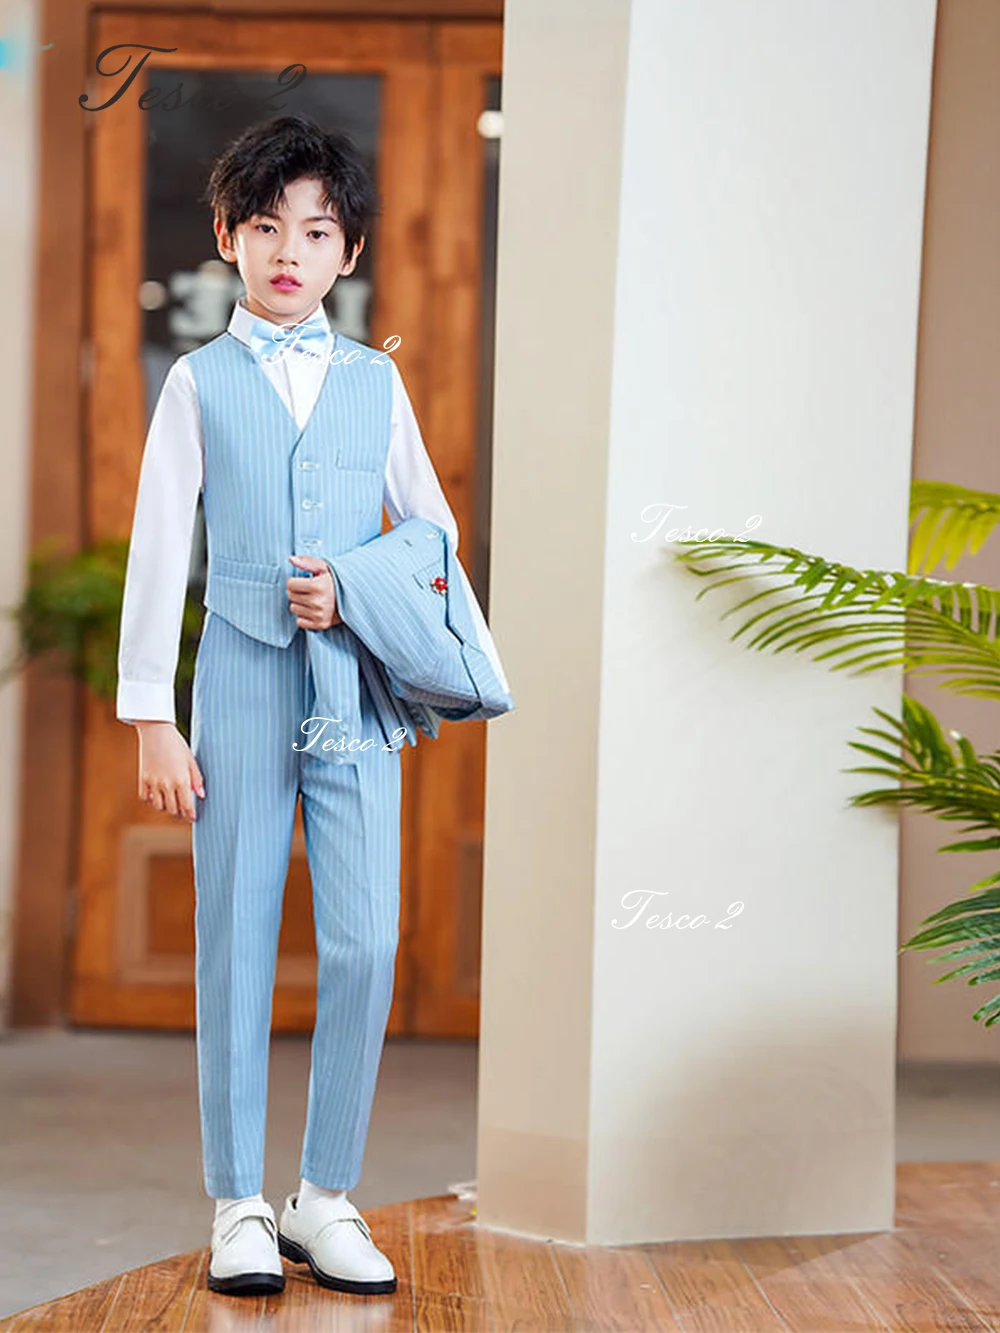 Tesco 2 Slim Fitting Stripes Suit For Kids Boys Little Gentleman Long Seleeve Suit For Bor For Wedding Party Suit